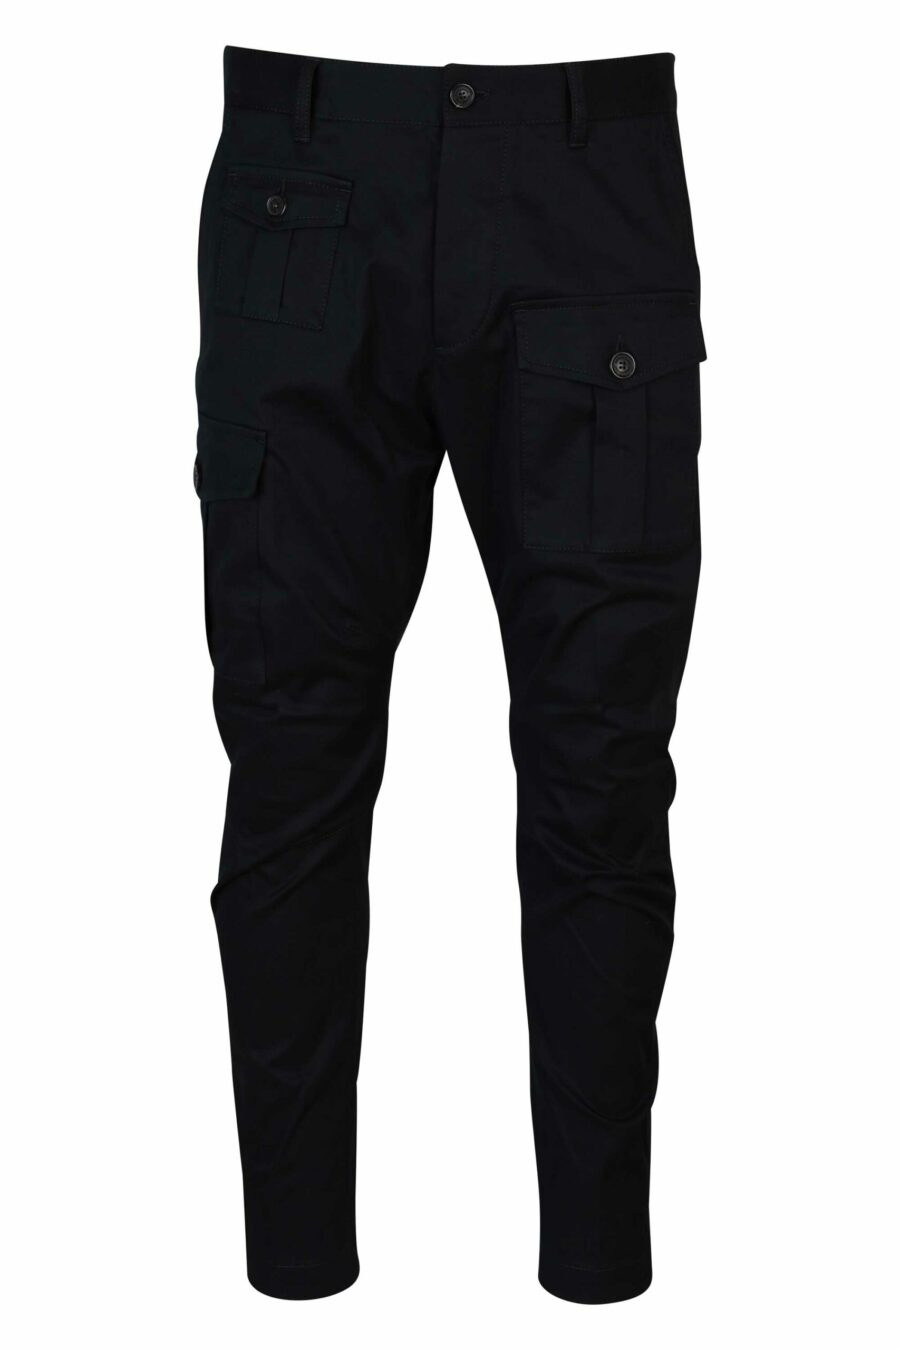 Black cargo trousers "sexy cargo" - 8054148389000 scaled